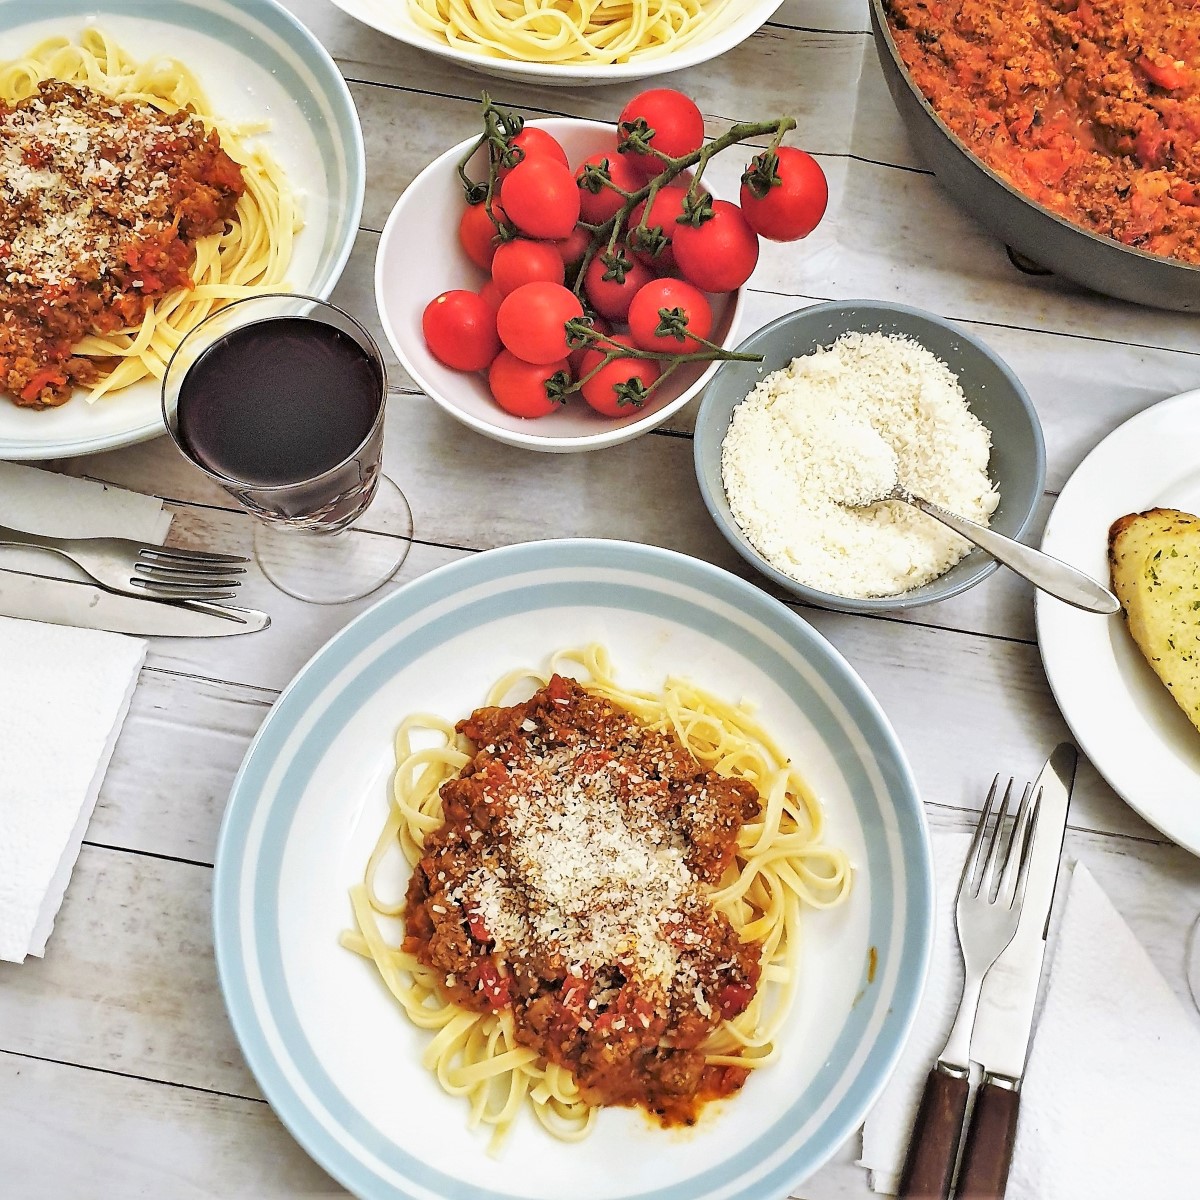 Overhead shot of a table set with plates of spaghetti bolognese.